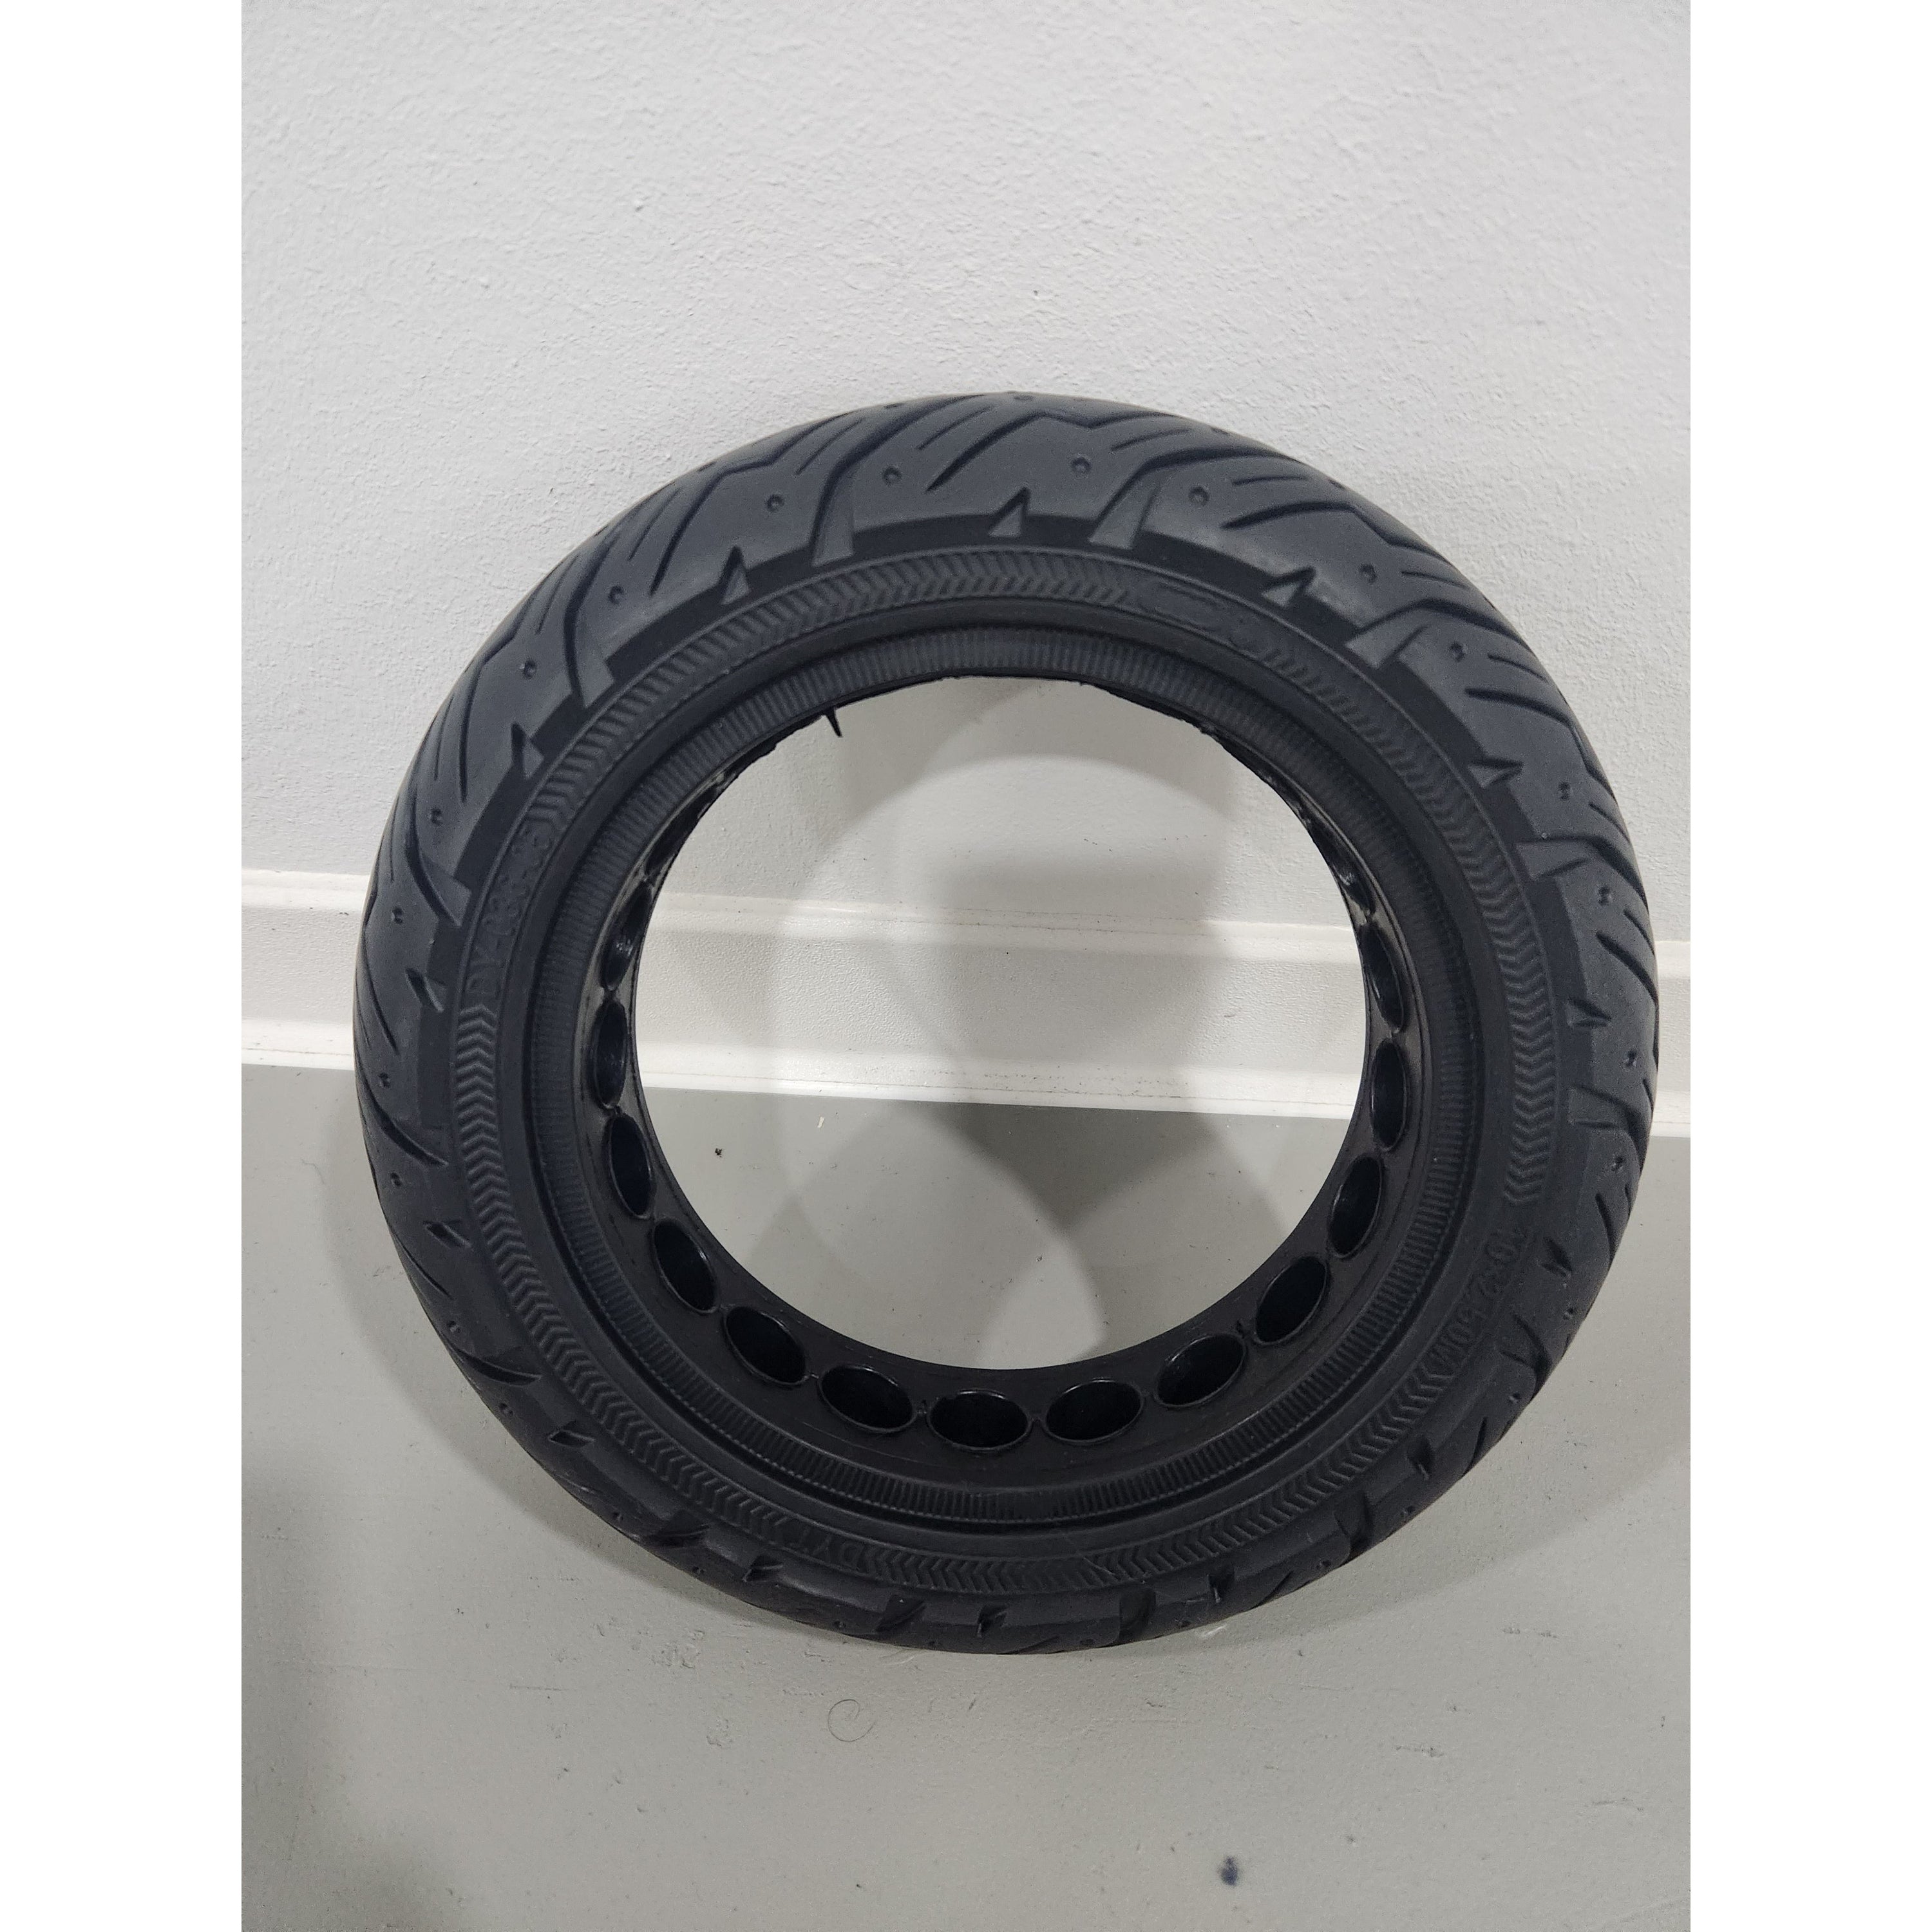 Ninebot Max G30 solid rubber hard rubber tires 10x2